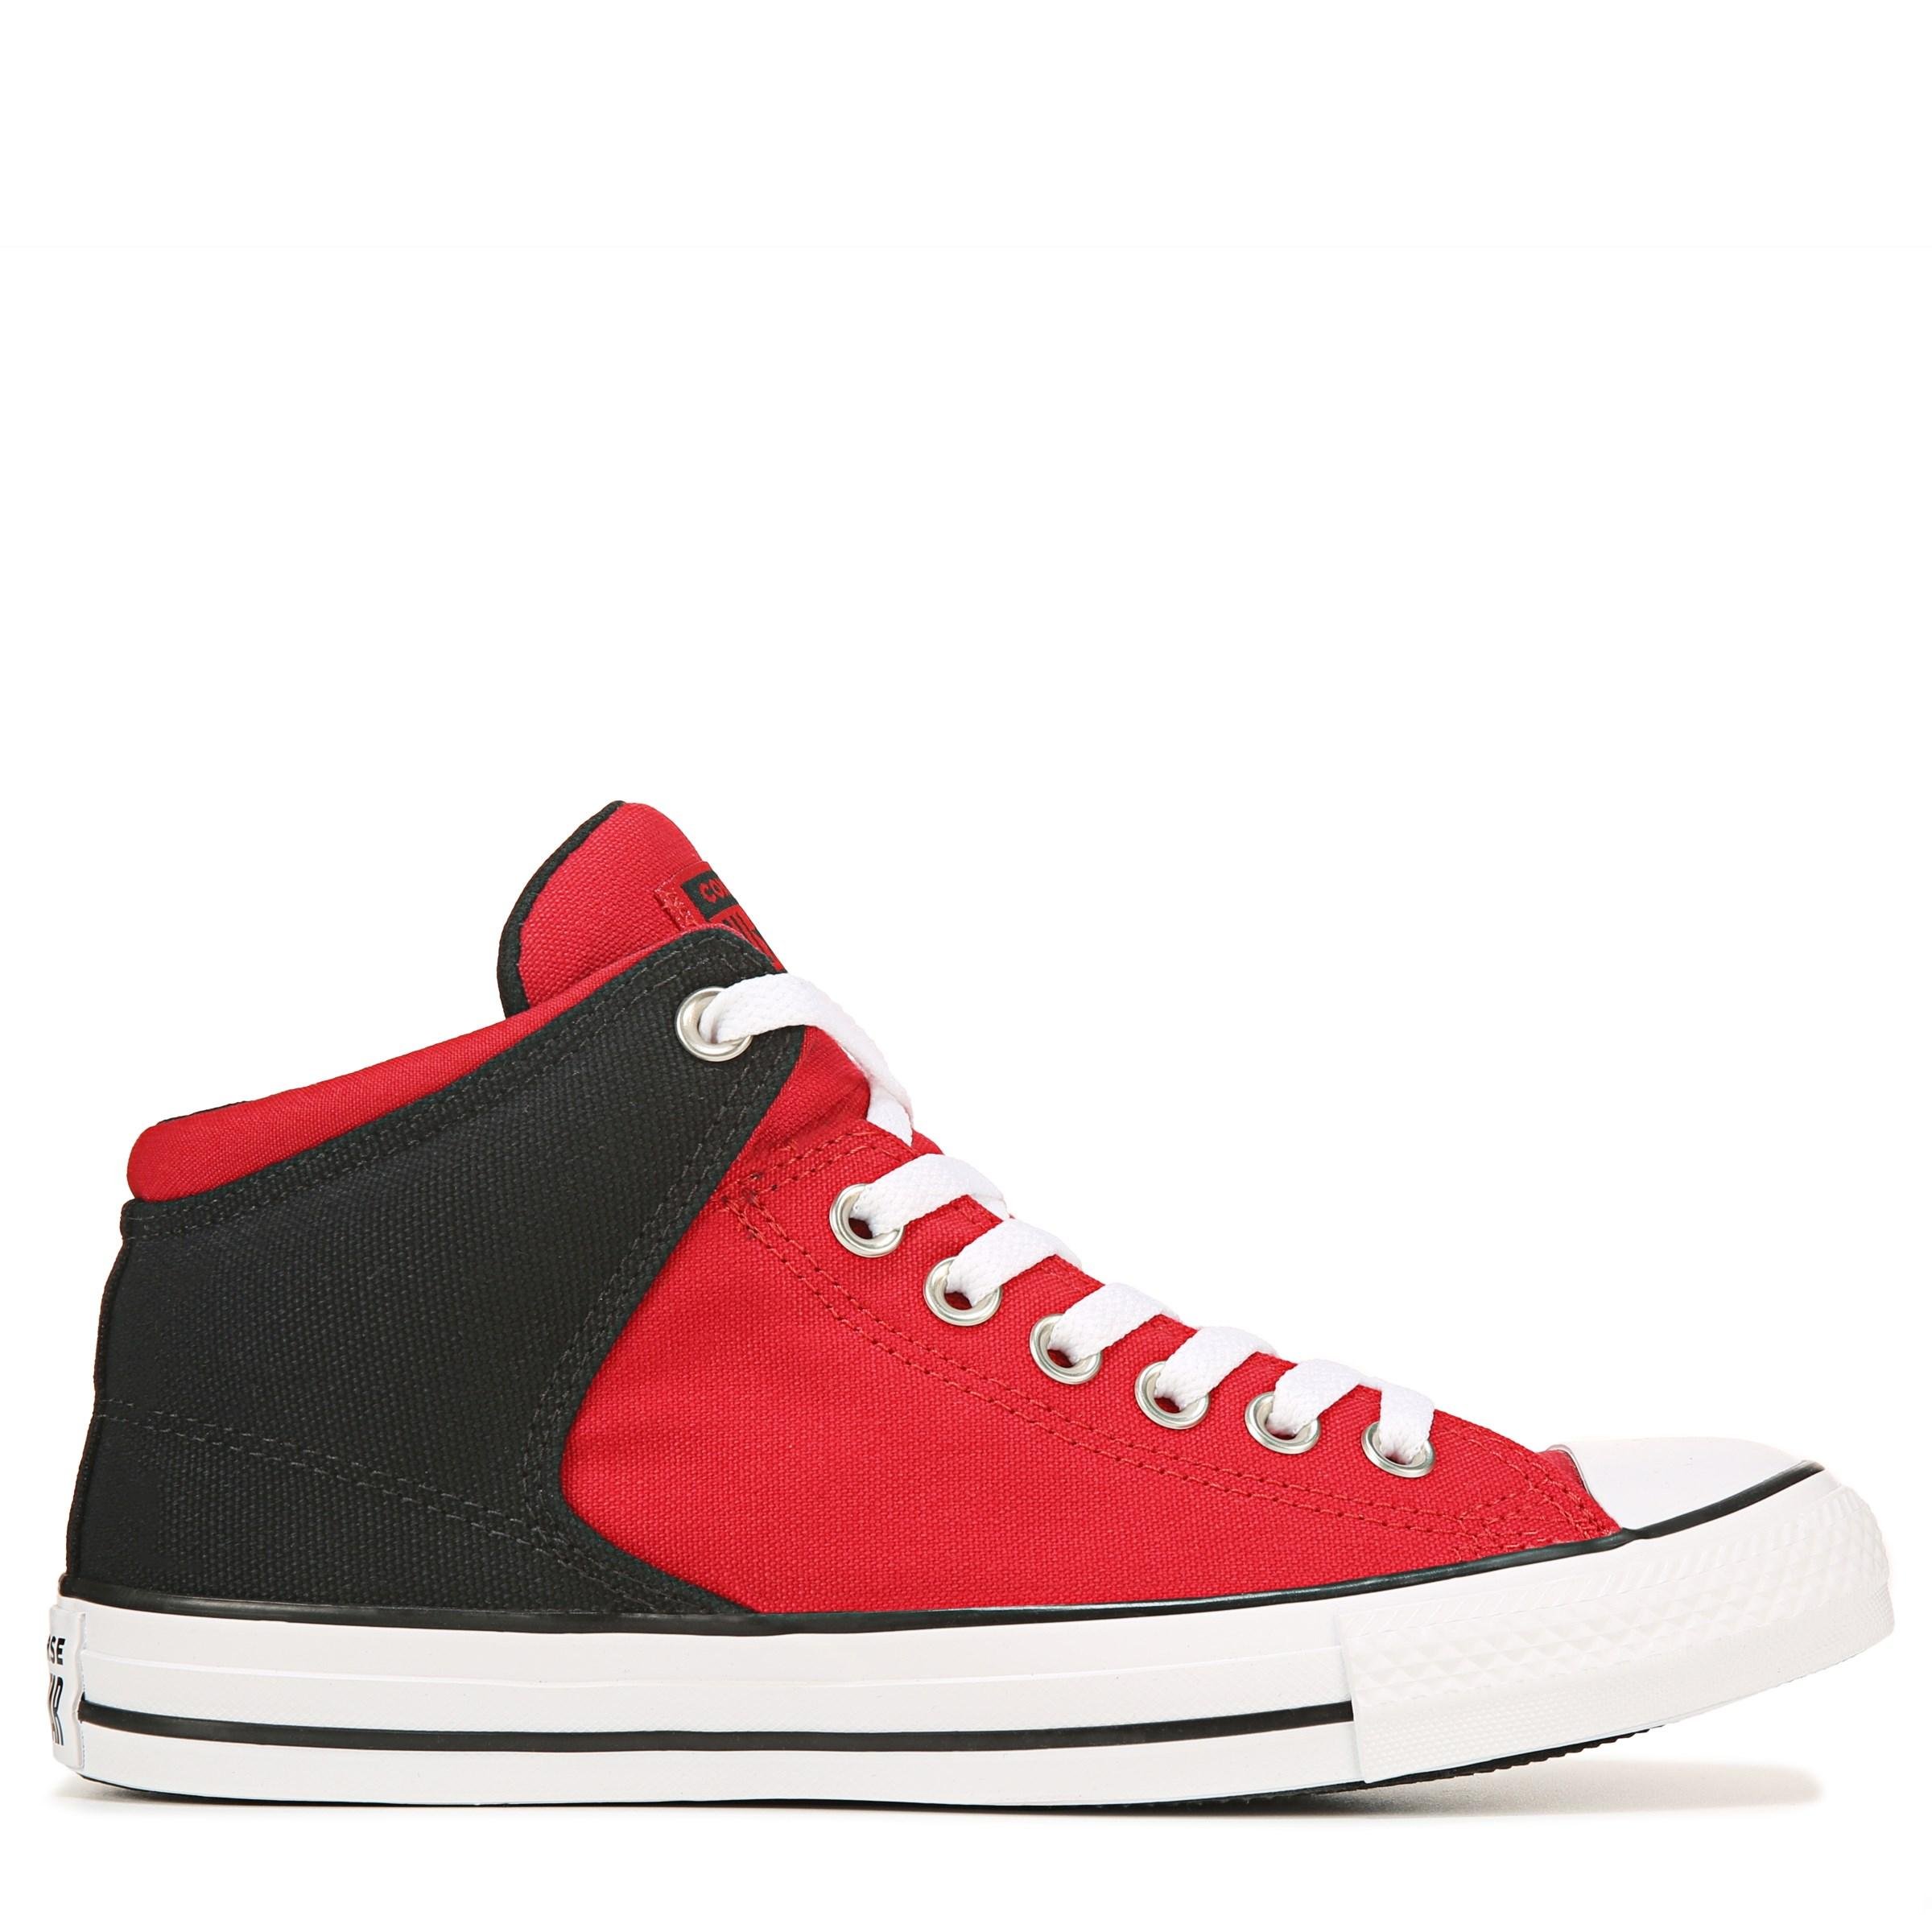 Converse Canvas Chuck Taylor All Star High Street High Top Sneakers in ...